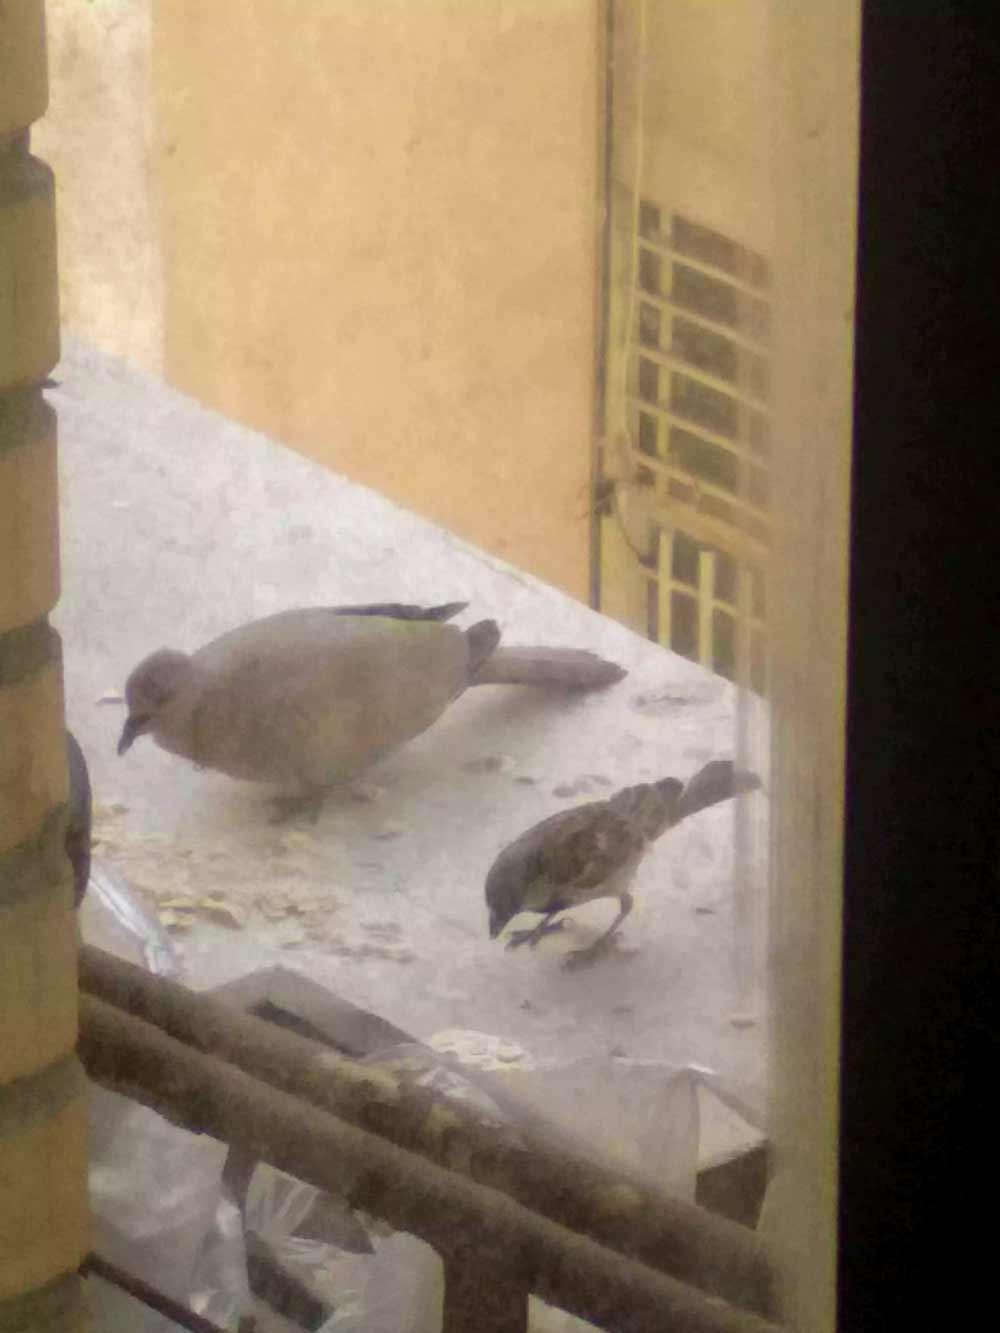 A Sparrow and a Laughing Dove sitting next to eachother eating bread crumbs